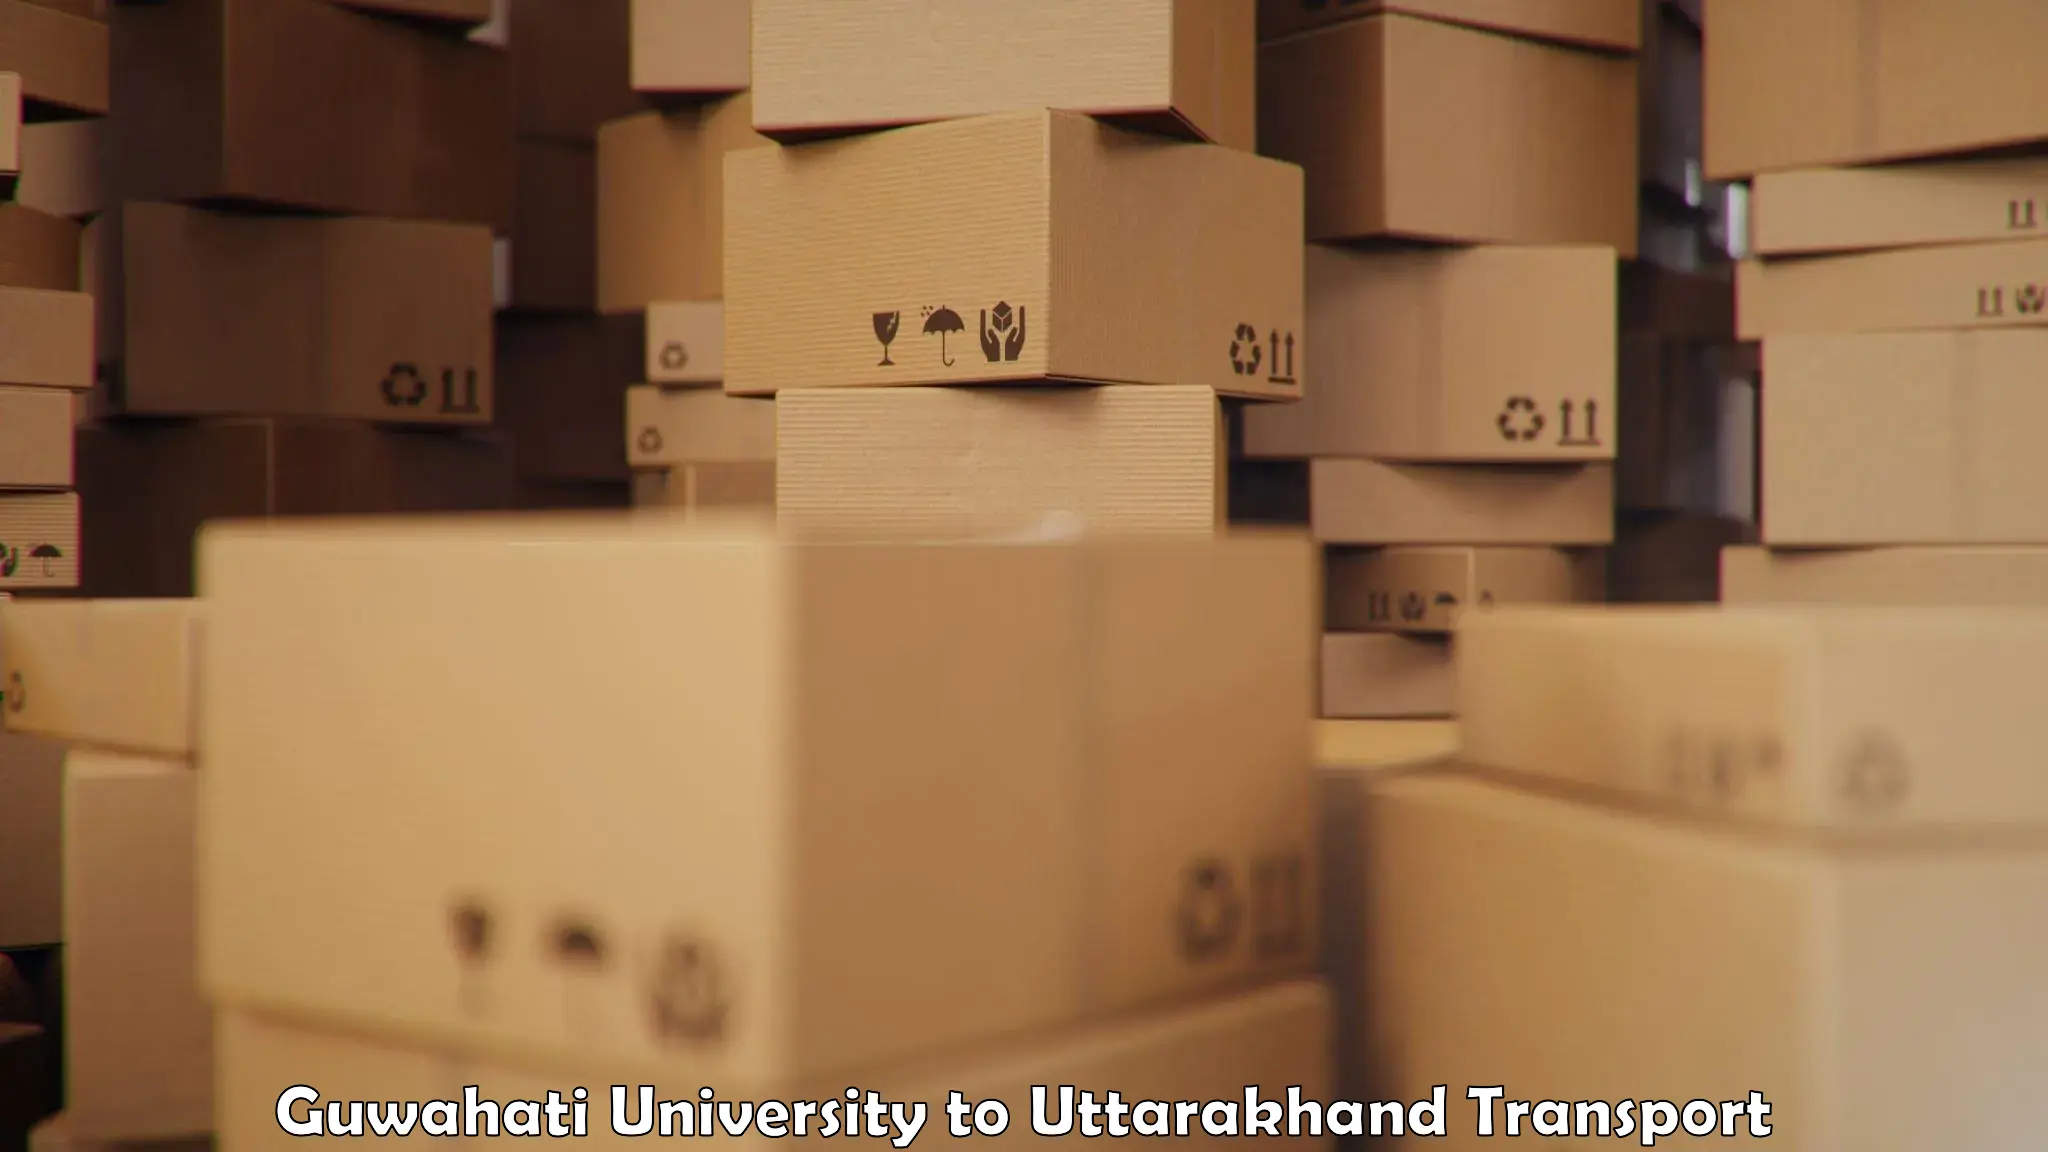 Interstate transport services Guwahati University to Lohaghat